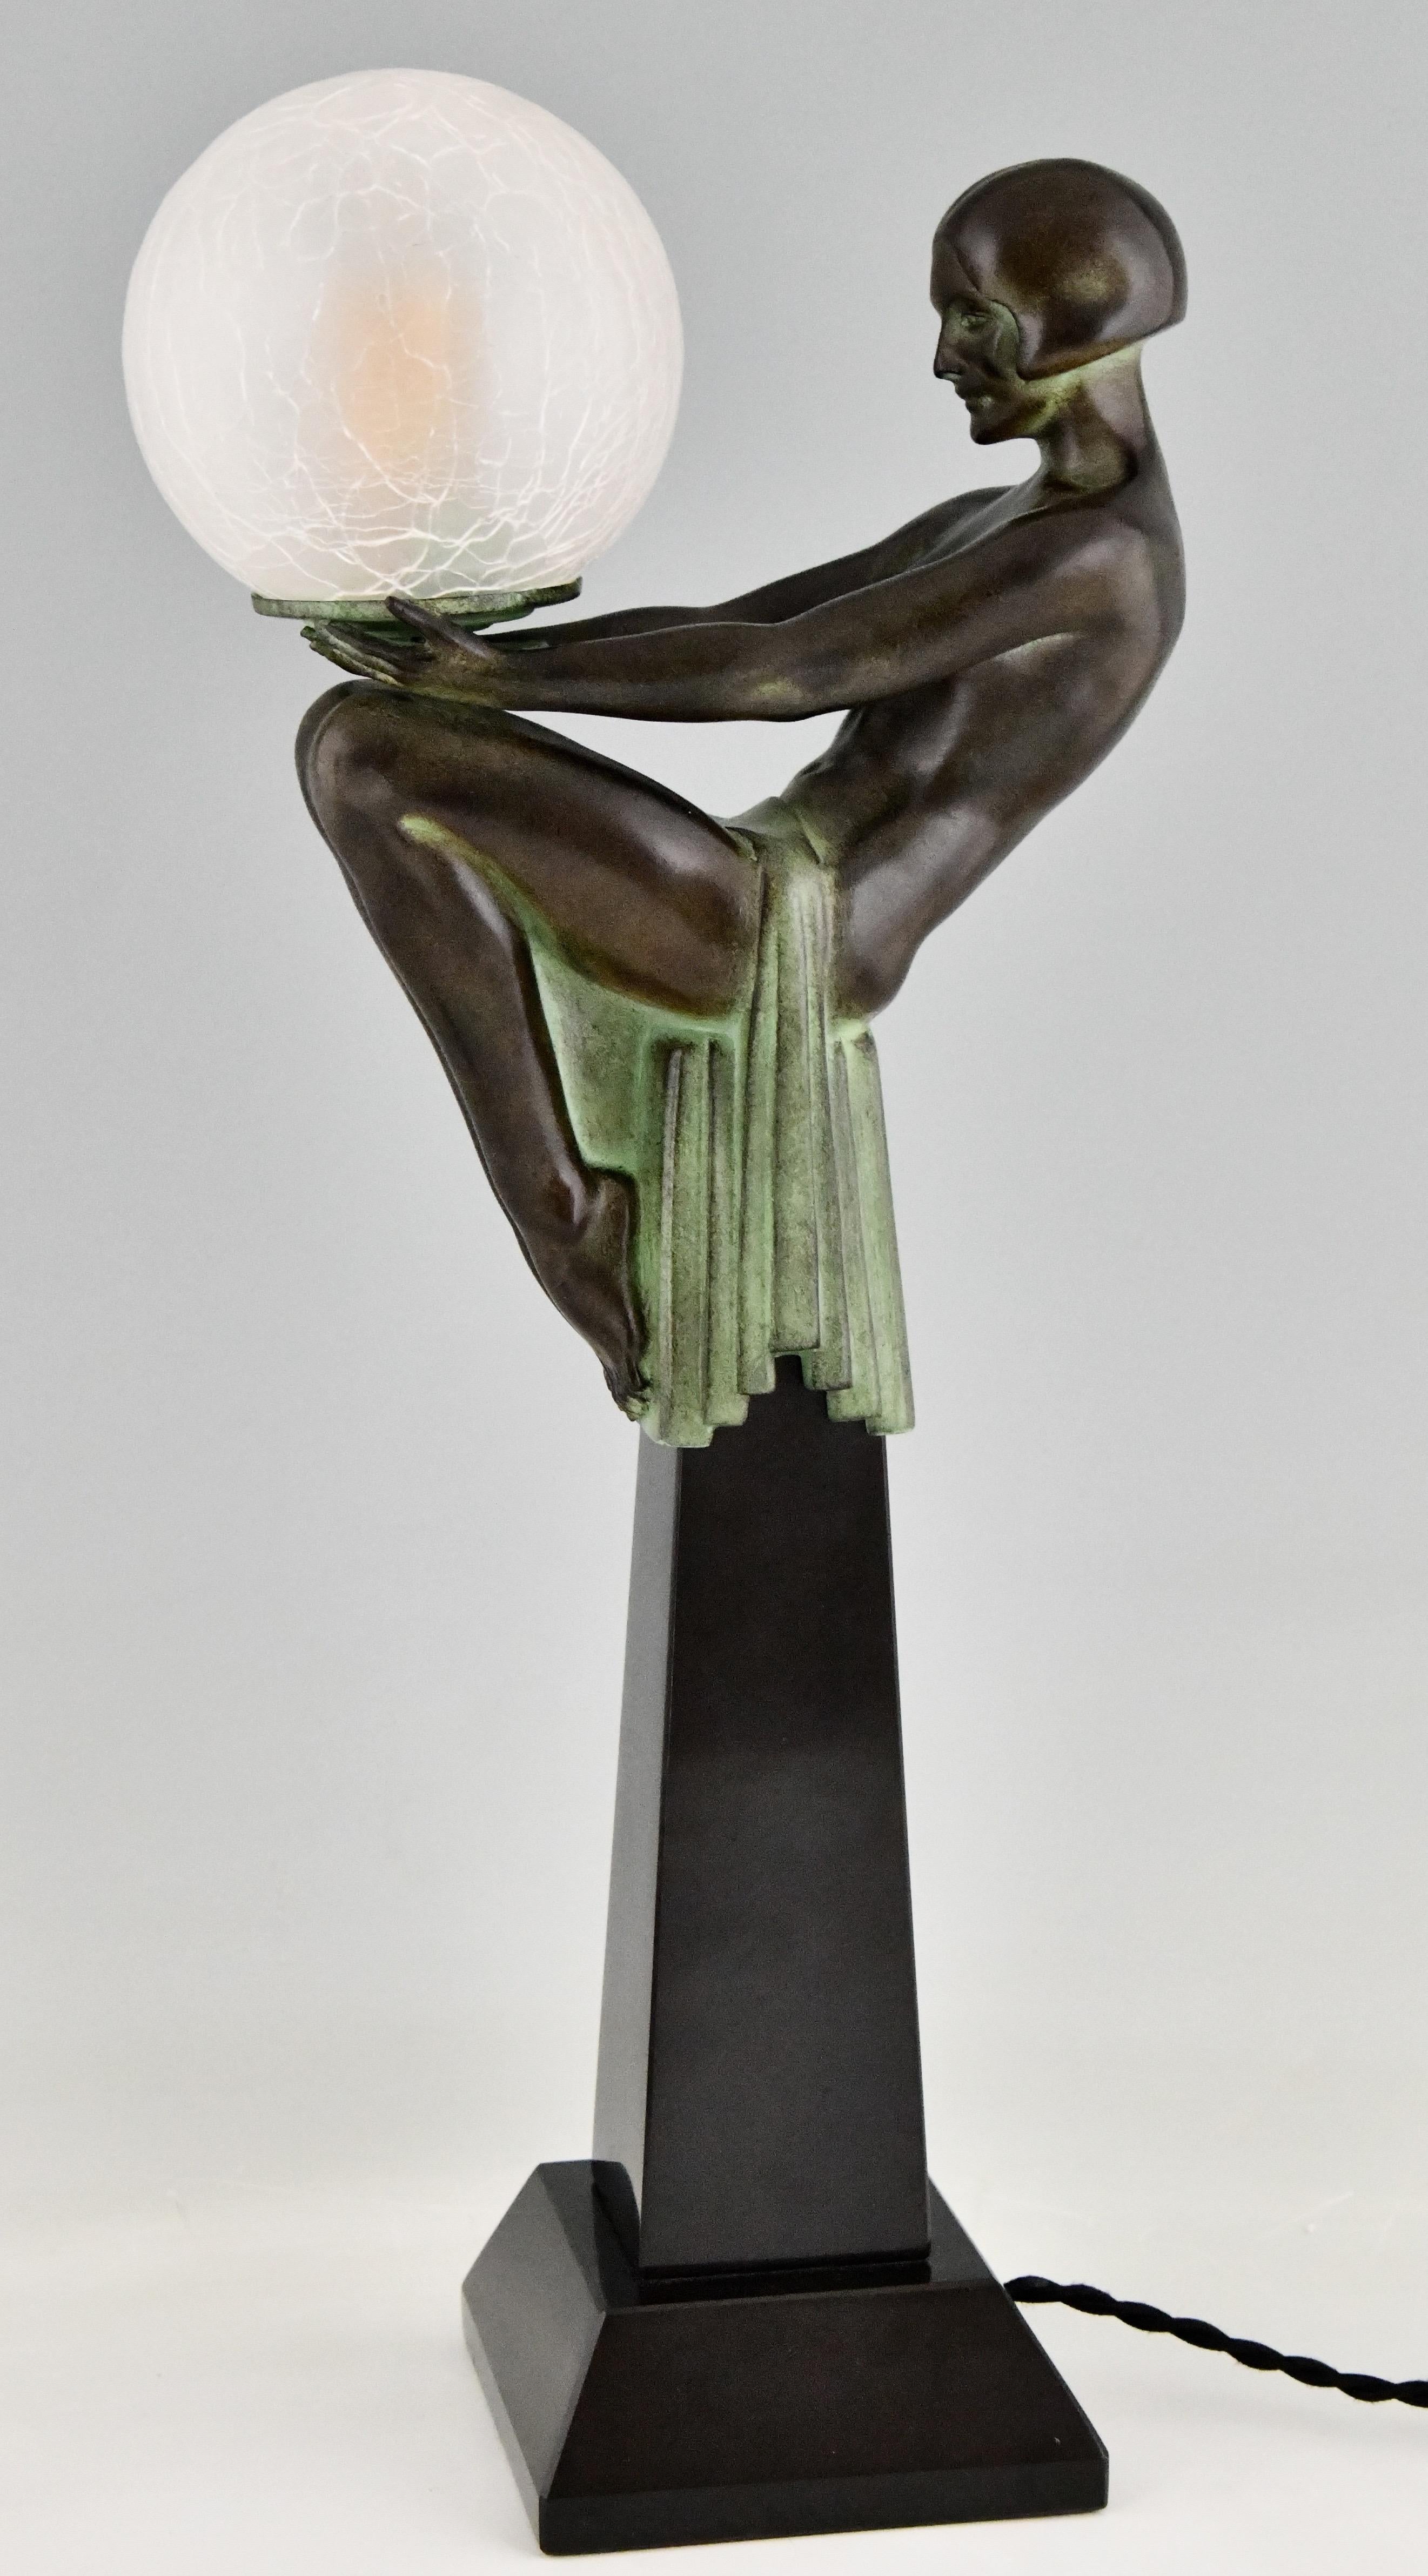 Pair of Art Deco Style Table Lamp Seated Nude with Globe Max Le Verrier Enigma In New Condition For Sale In Antwerp, BE